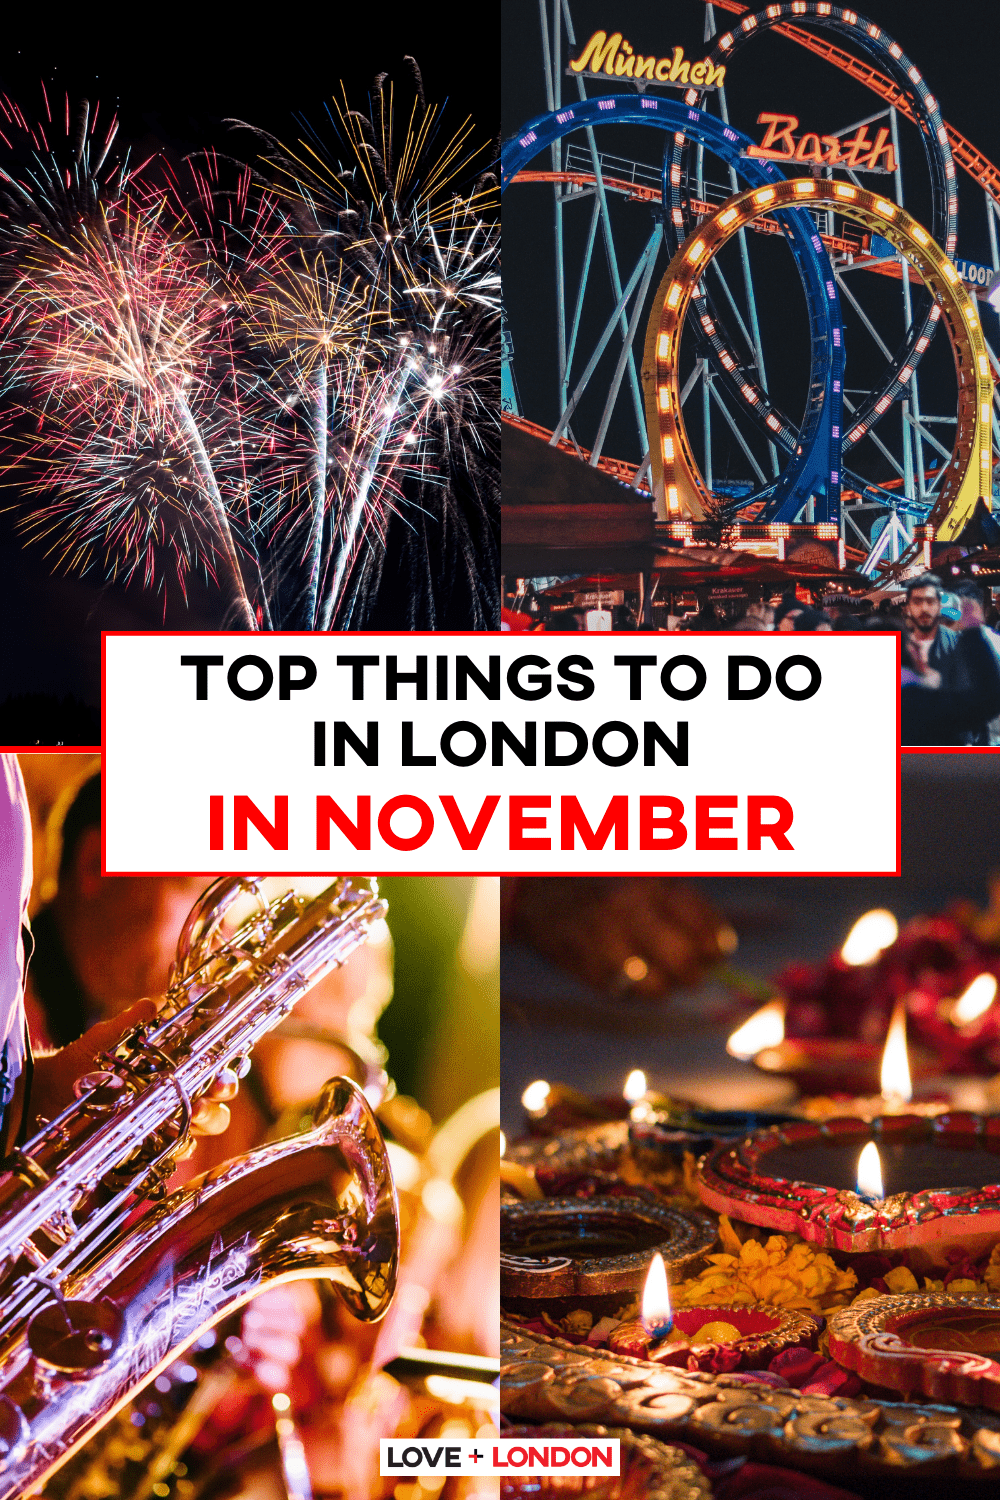 Top Things to do in London in November